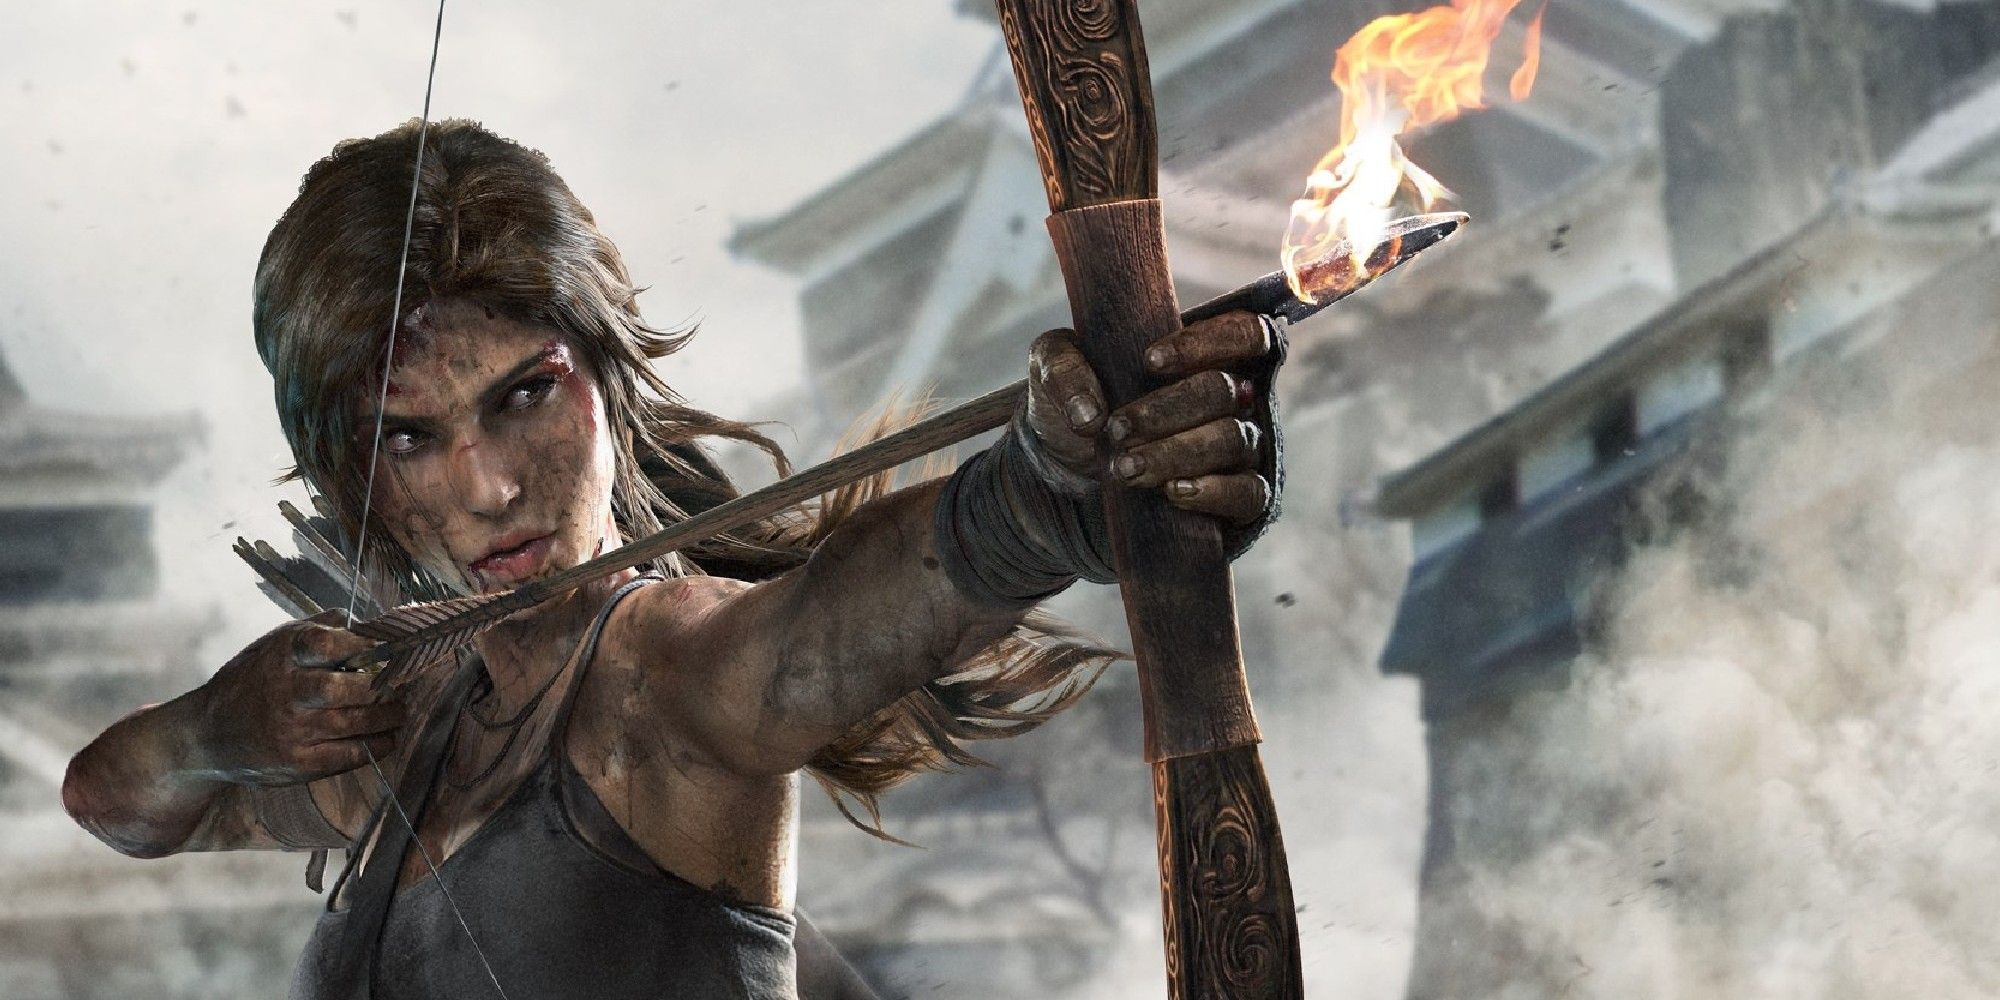 A dirt covered Lara Croft holding a bow and flaming arrow in Tomb Raider, aiming off camera